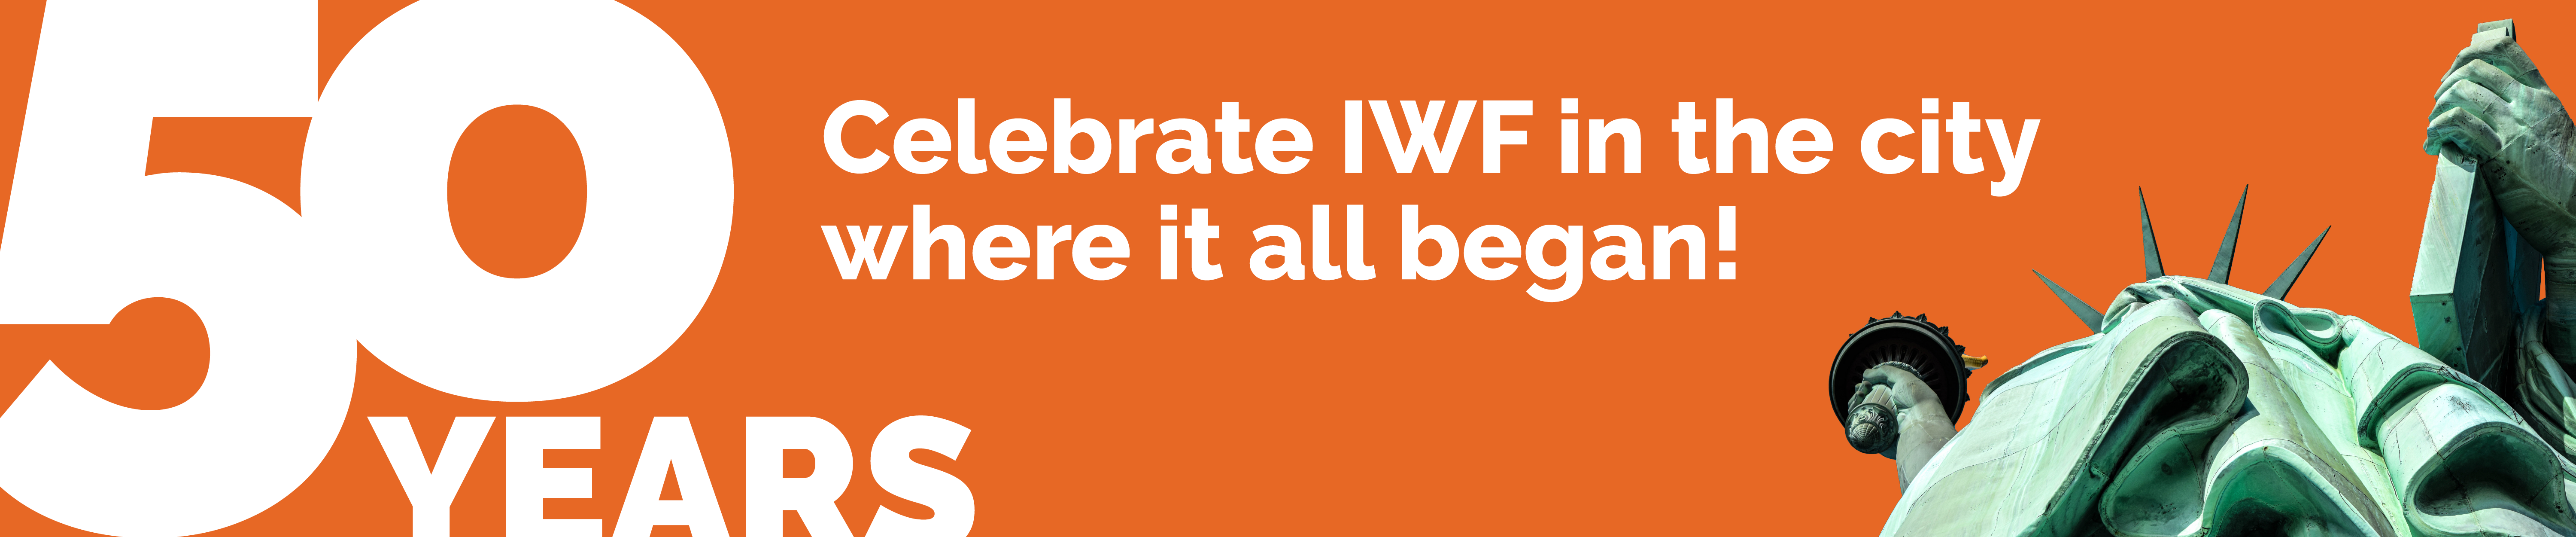 50 Years - Celebrating IWF in the city where it all began!